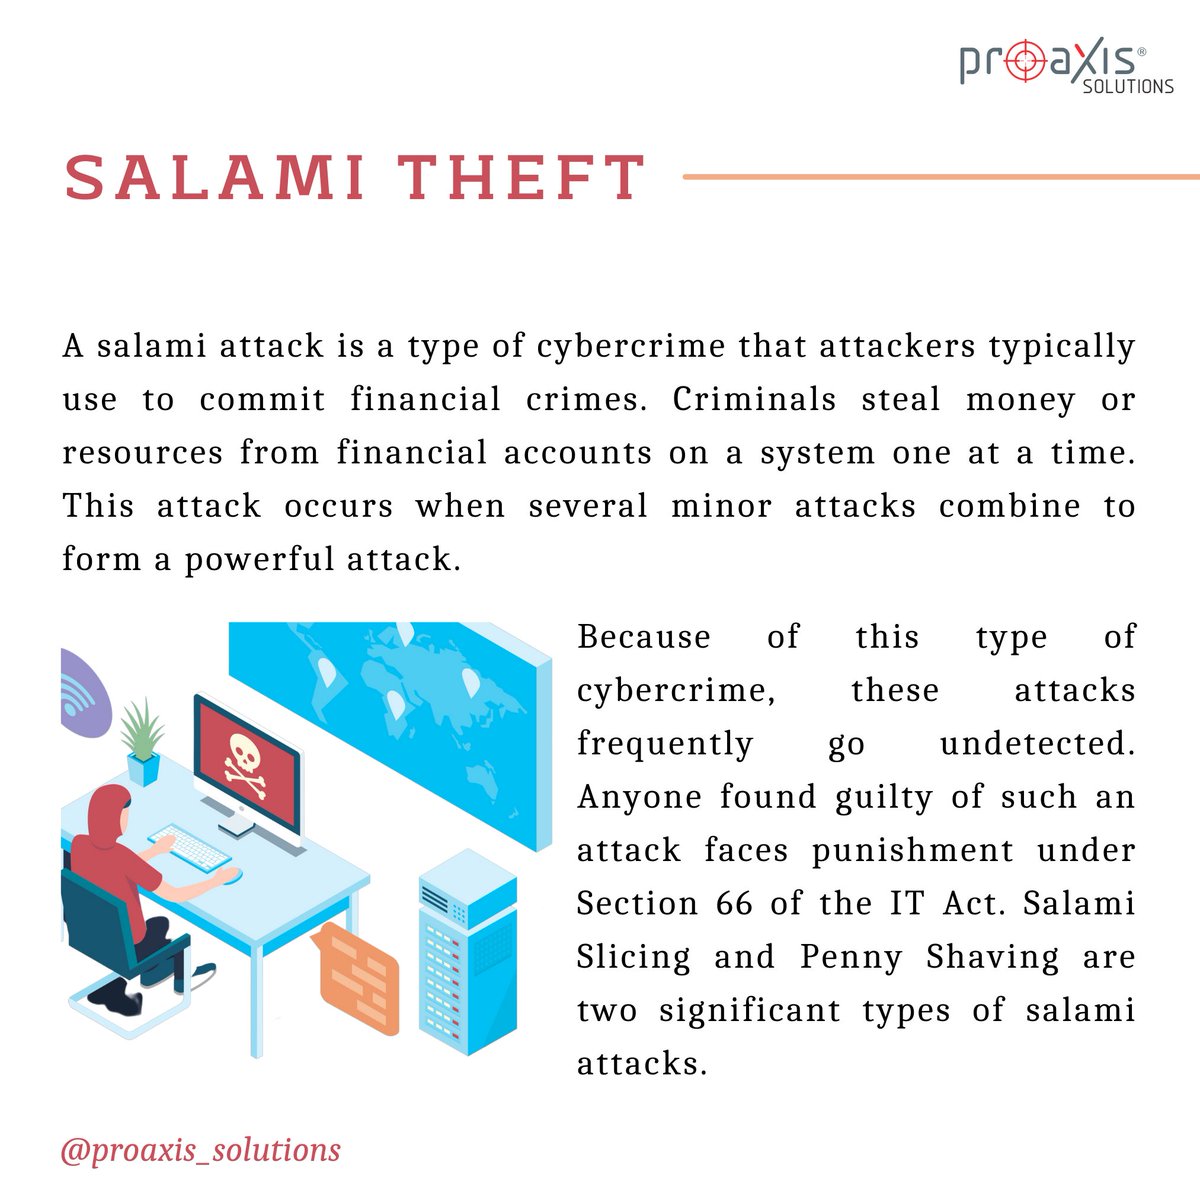 Have you heard of SALAMI THEFT?
.
.
Follow @ProaxisScitech
.
.
.

#salamiattack #onlinejobfraud #cybersecurity #cybercrime #cyberguide #cyberattack #cyberthreat #cyberhygiene #informationsecurity #awareness #hacking  #informationhygiene #hackingnews #forensiclab #proaxissolutions